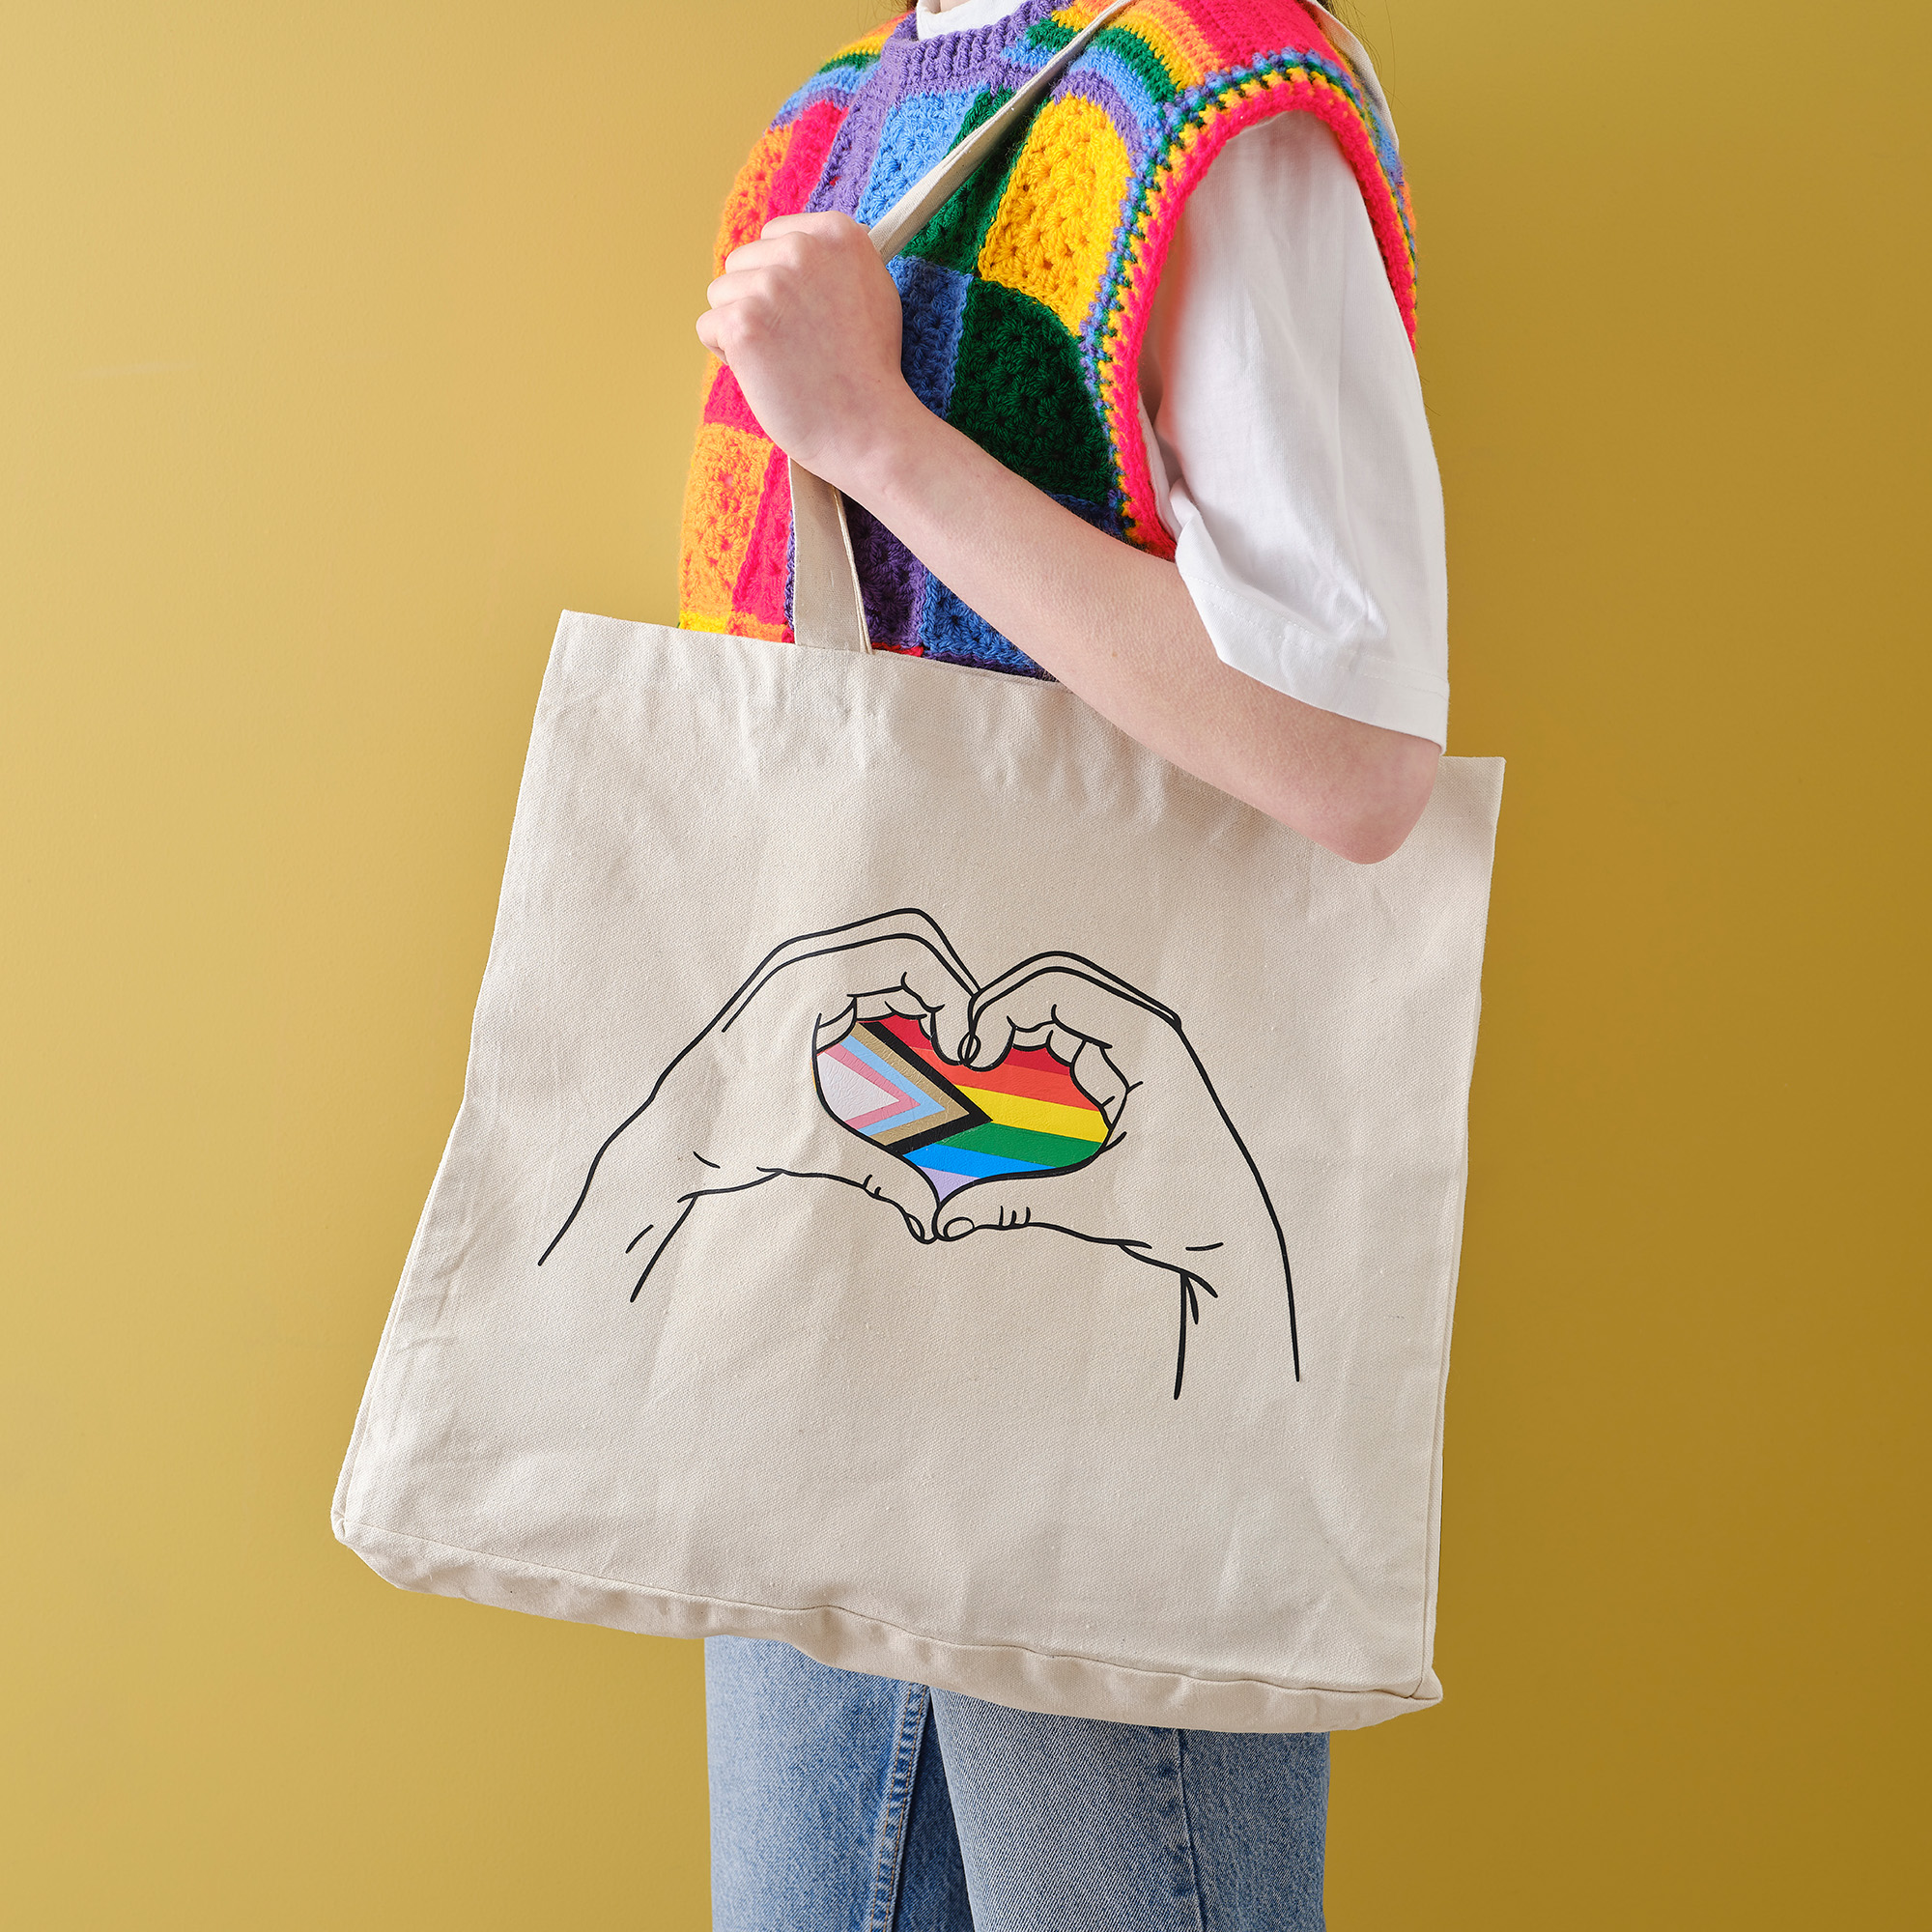 Idea main how to personalise a tote bag for pride